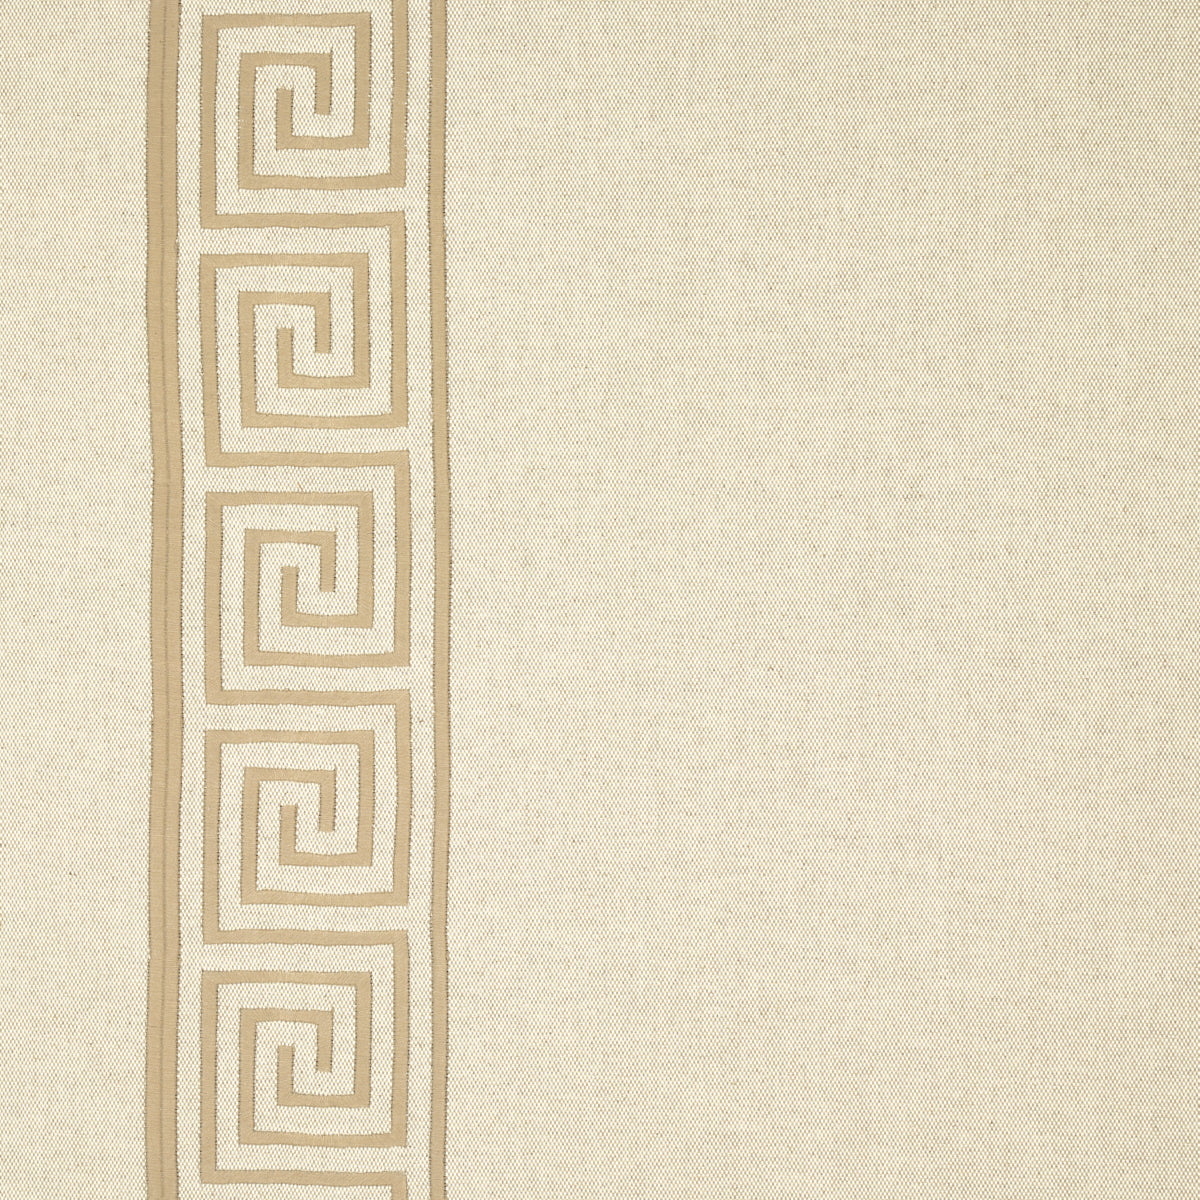 GREEK KEY EMBROIDERY | PEBBLE AND TAUPE